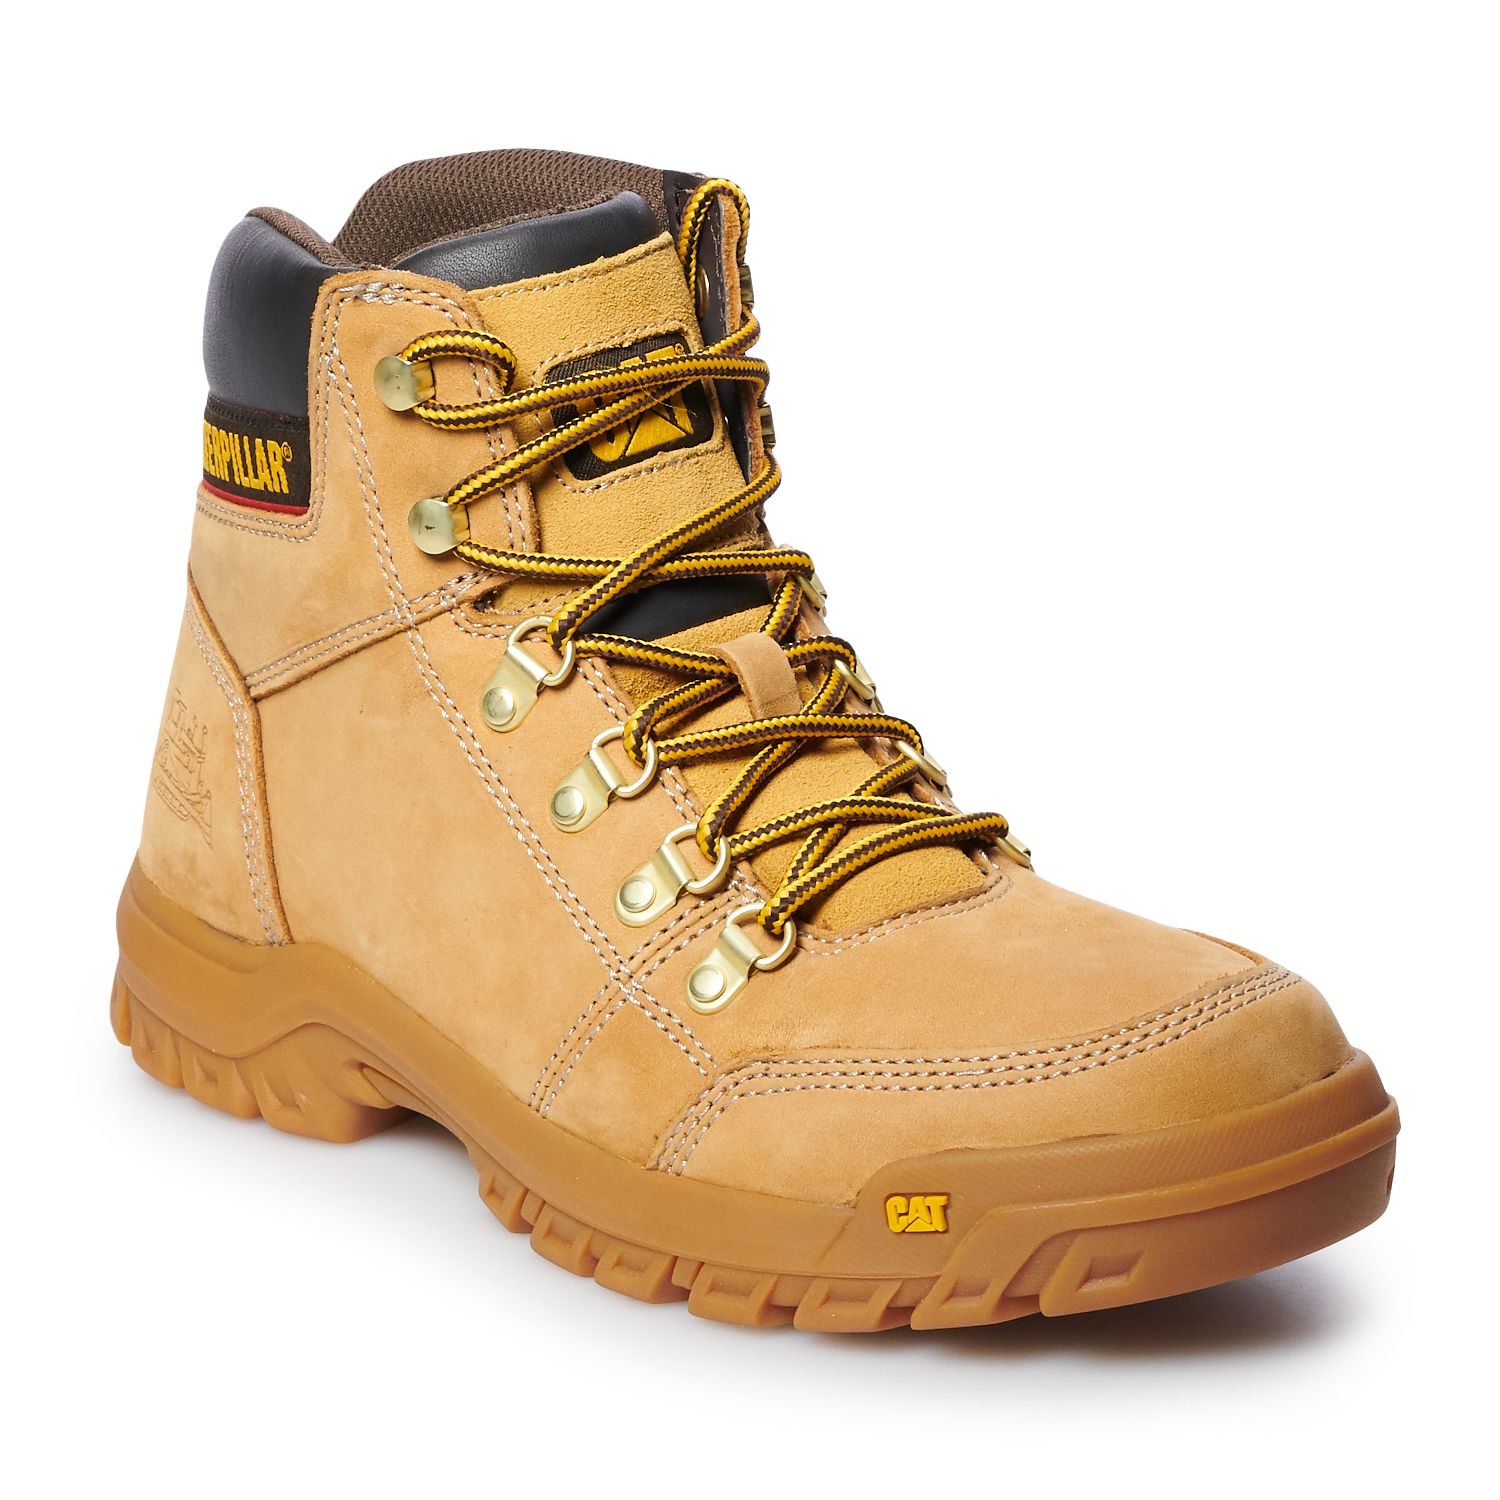 kohl's timberland work boots